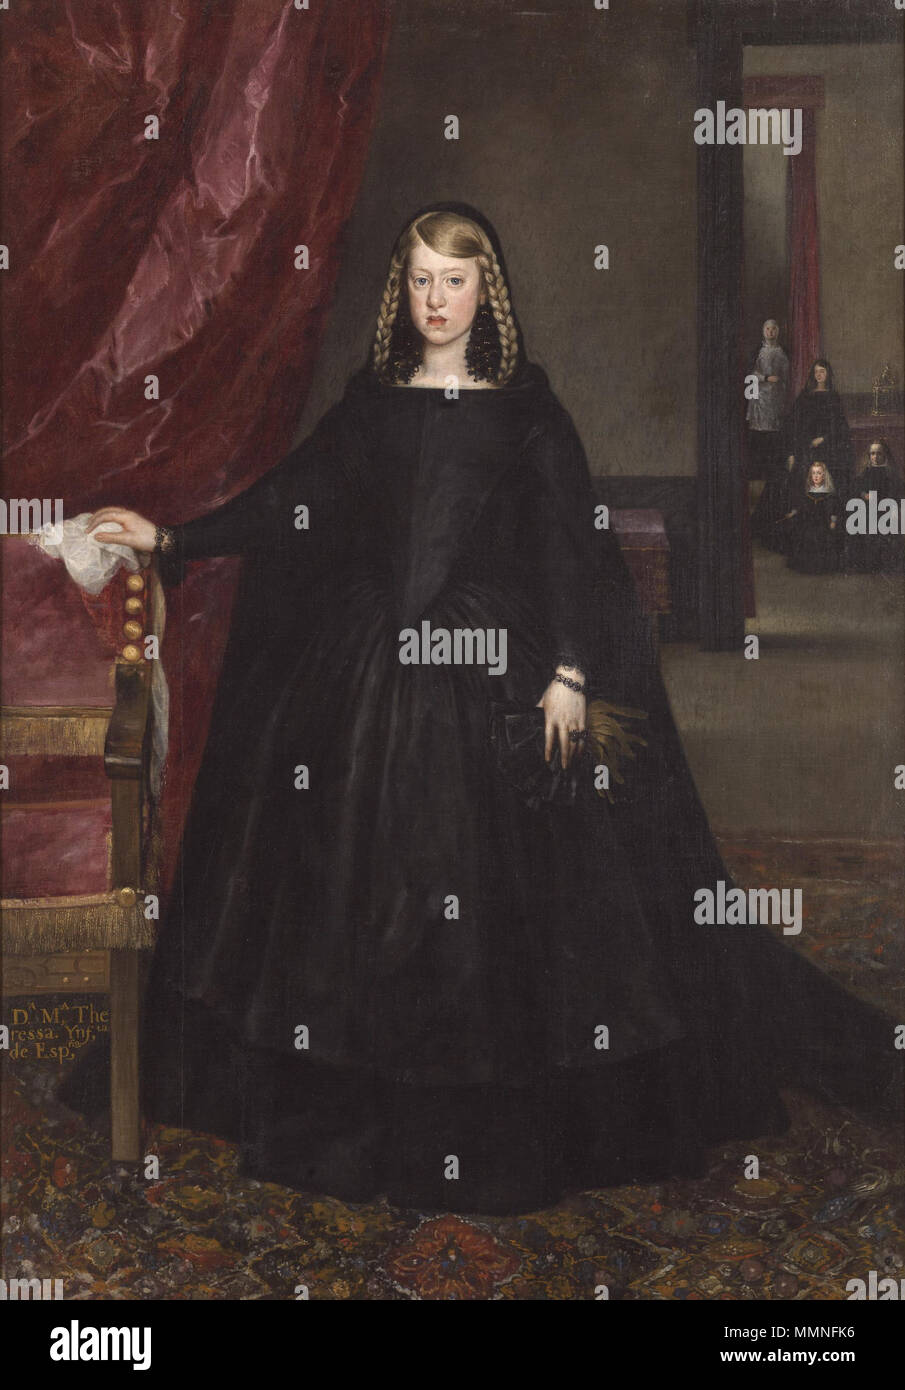 .  English: The sitter is Margaret of Spain, first wife of Leopold I, Holy Roman Emperor, wearing mourning dress for her father, Philip IV of Spain, with children and attendants in mourning dress.  Spanish: La emperatriz Margarita de Austria The Empress Doña Margarita de Austria in Mourning Dress. 1666. 1651 Margarita1 Stock Photo